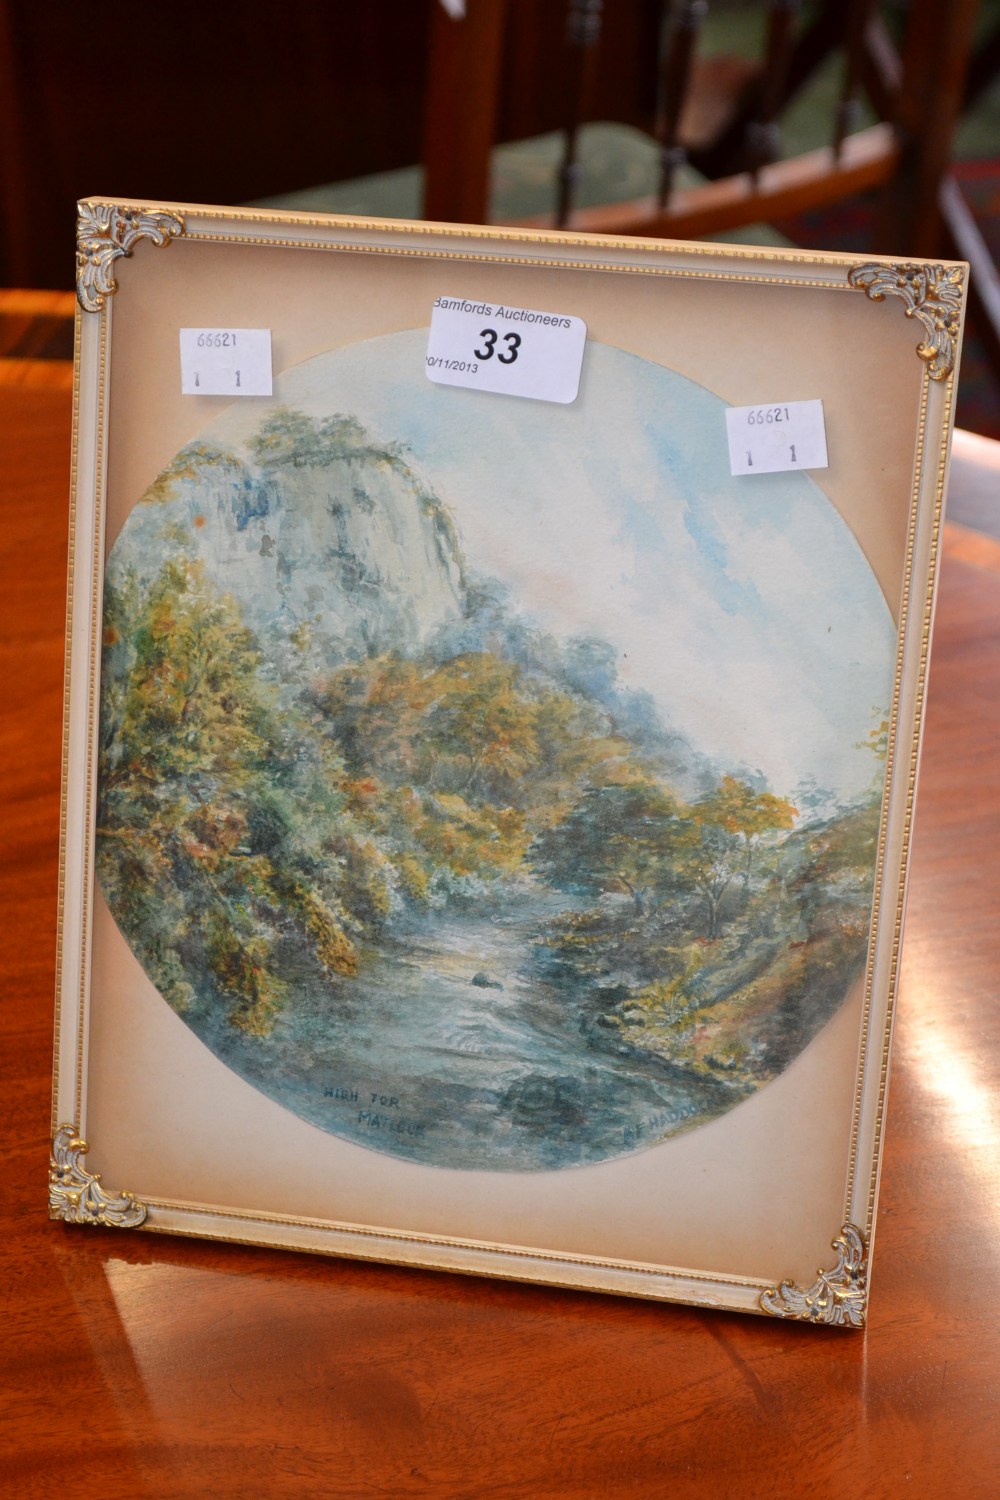 A.F.Maddocks High Tor, Matlock signed, titled, watercolour